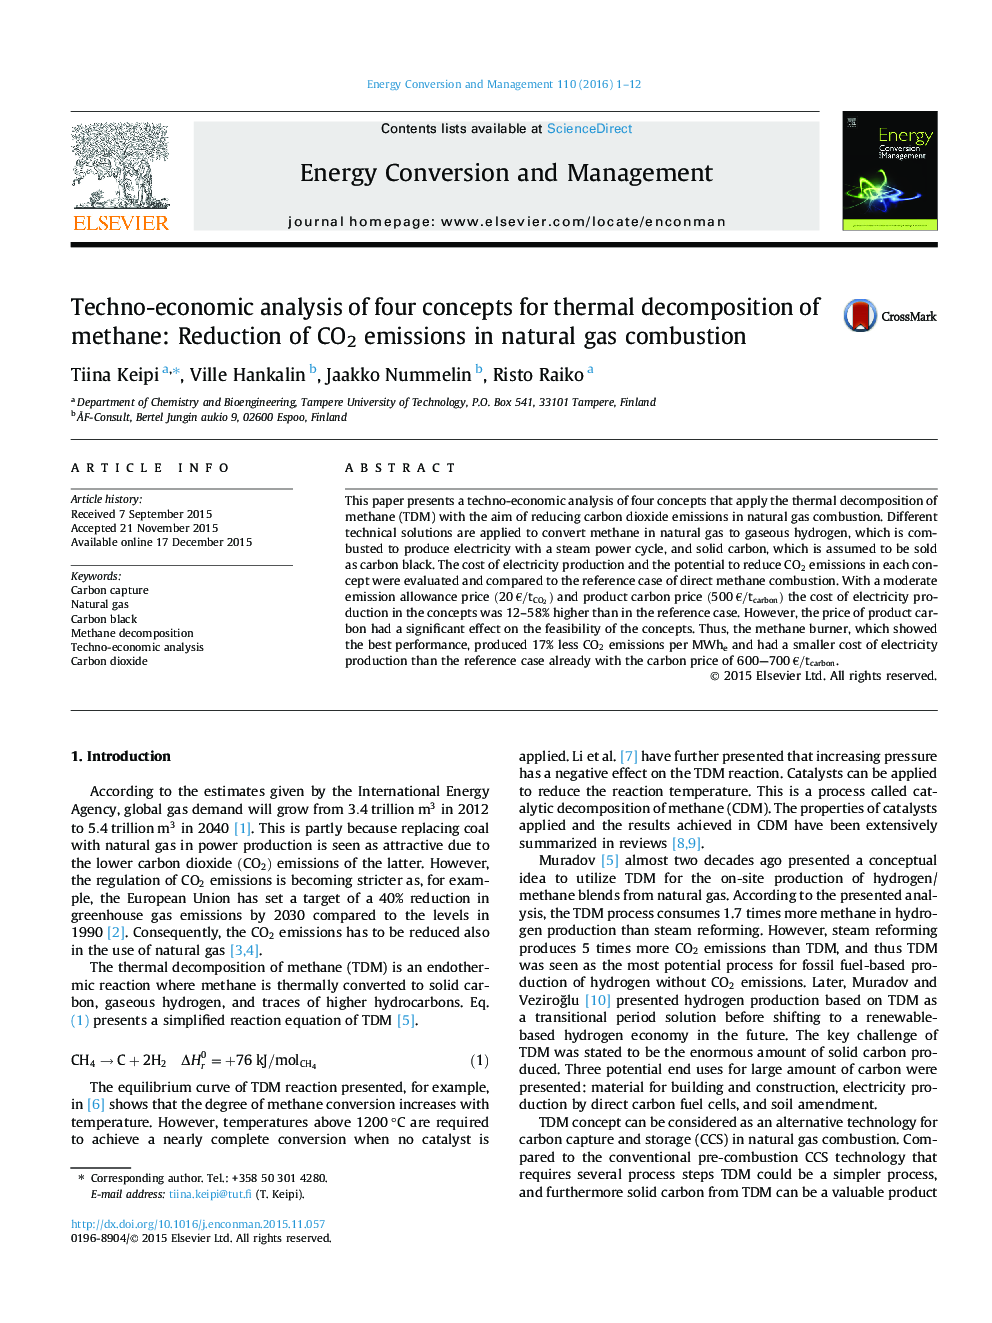 Techno-economic analysis of four concepts for thermal decomposition of methane: Reduction of CO2 emissions in natural gas combustion